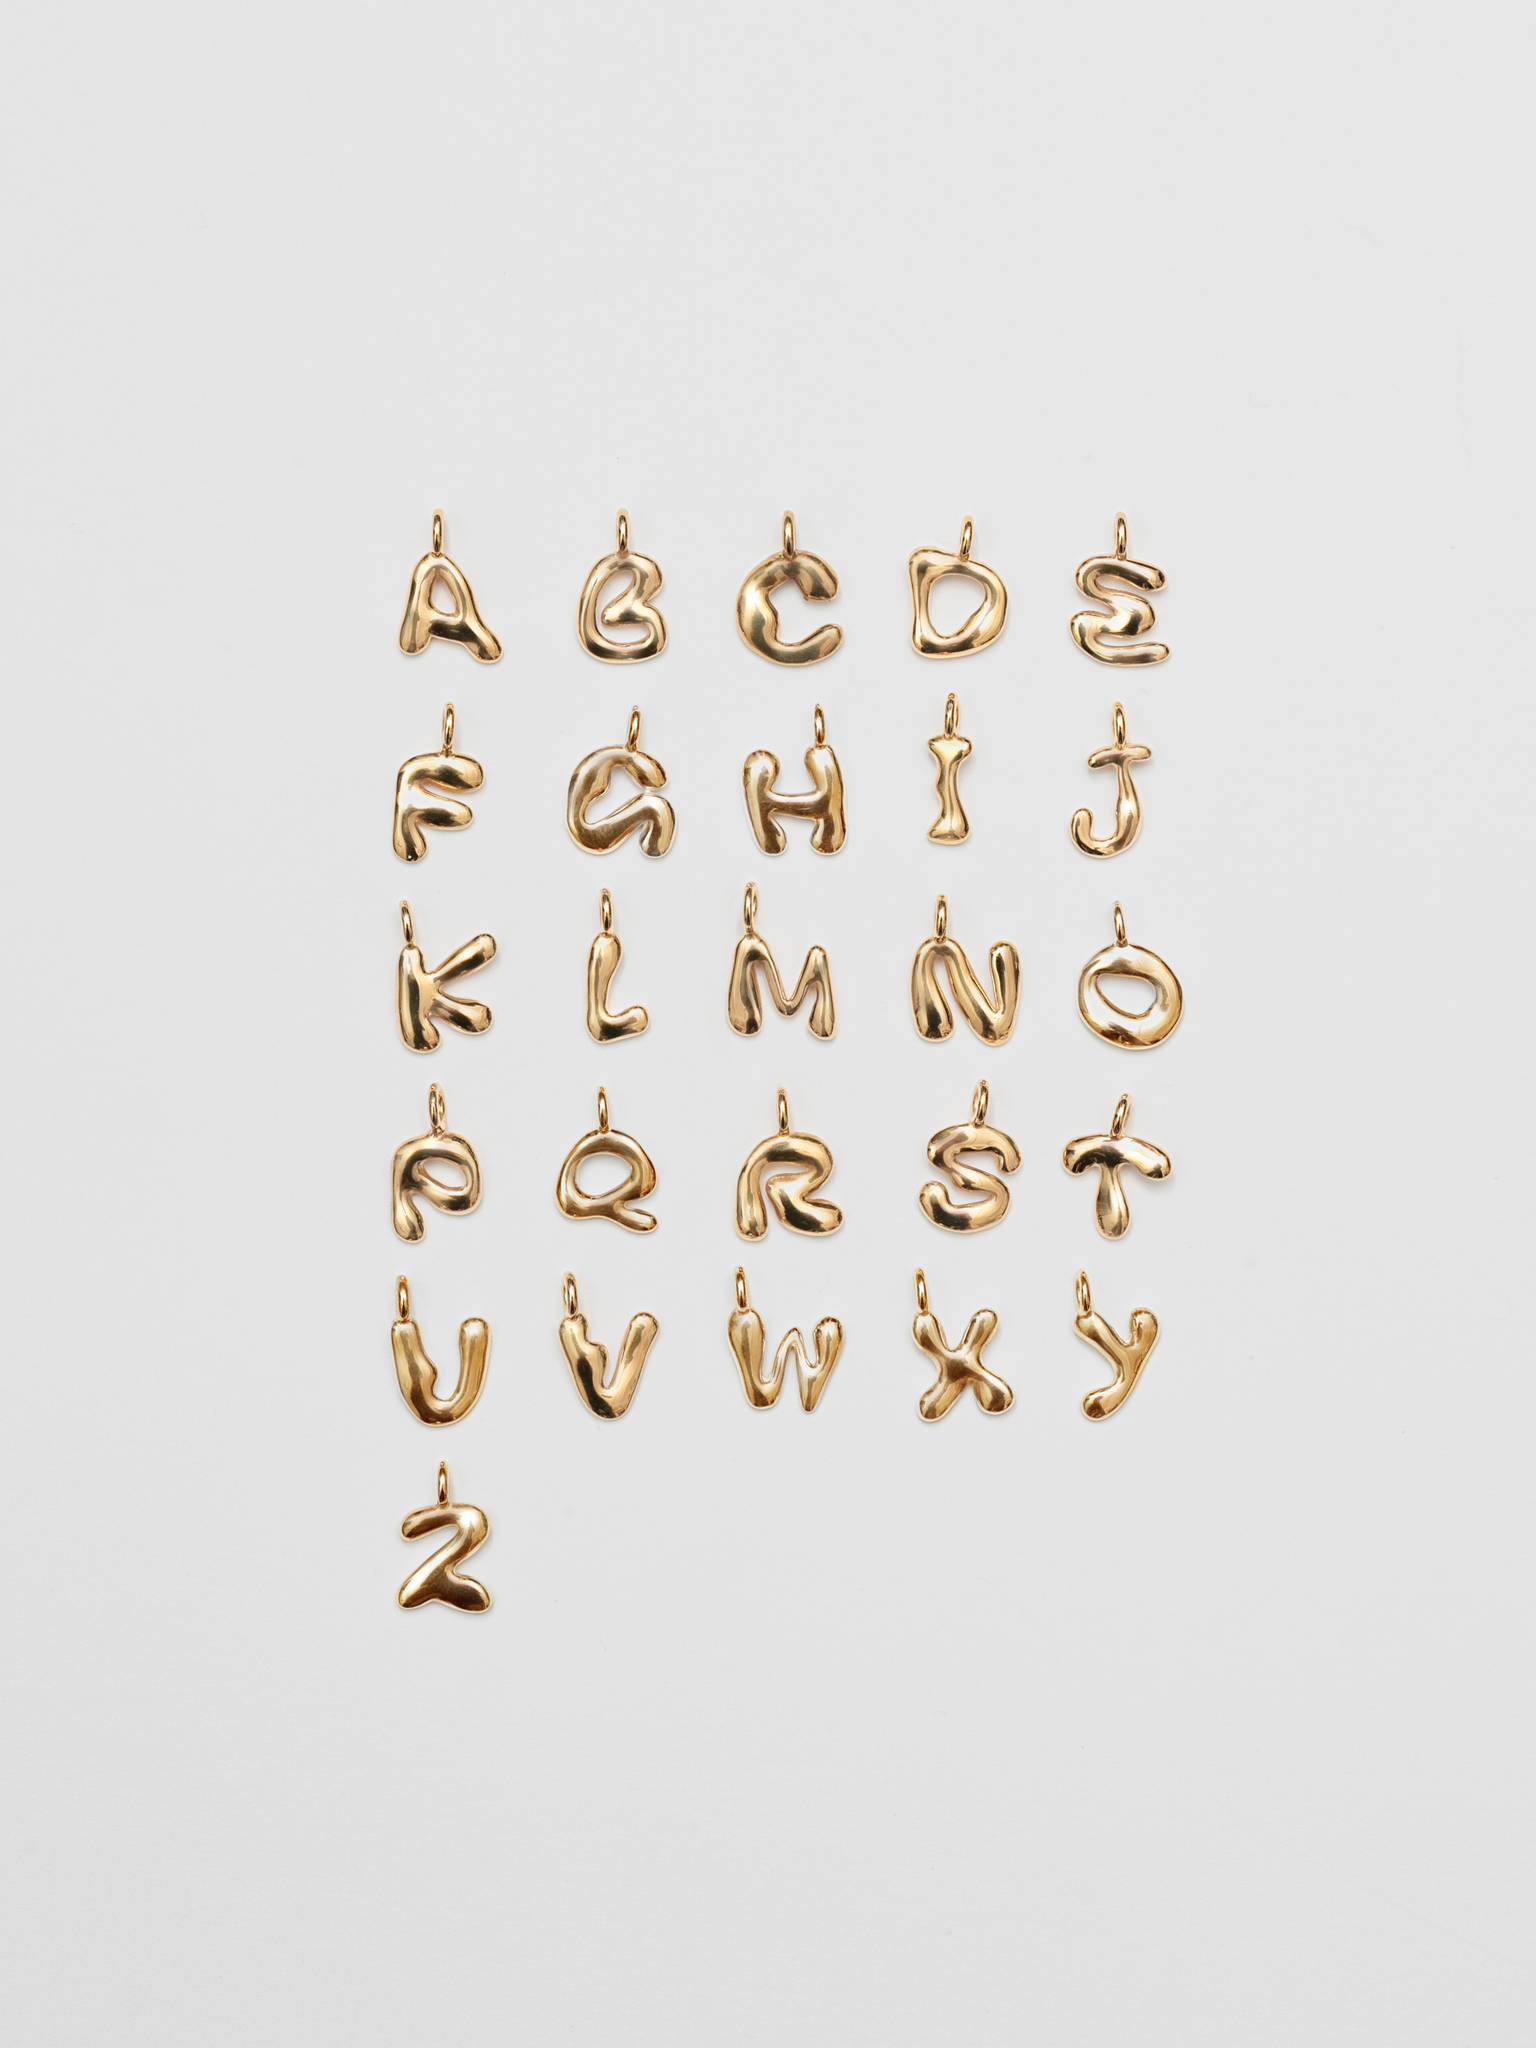 Wolf Circus Alphabet Initial Necklace with Letter Charm in 14k Gold Plated-Necklaces-wolfcircus.com